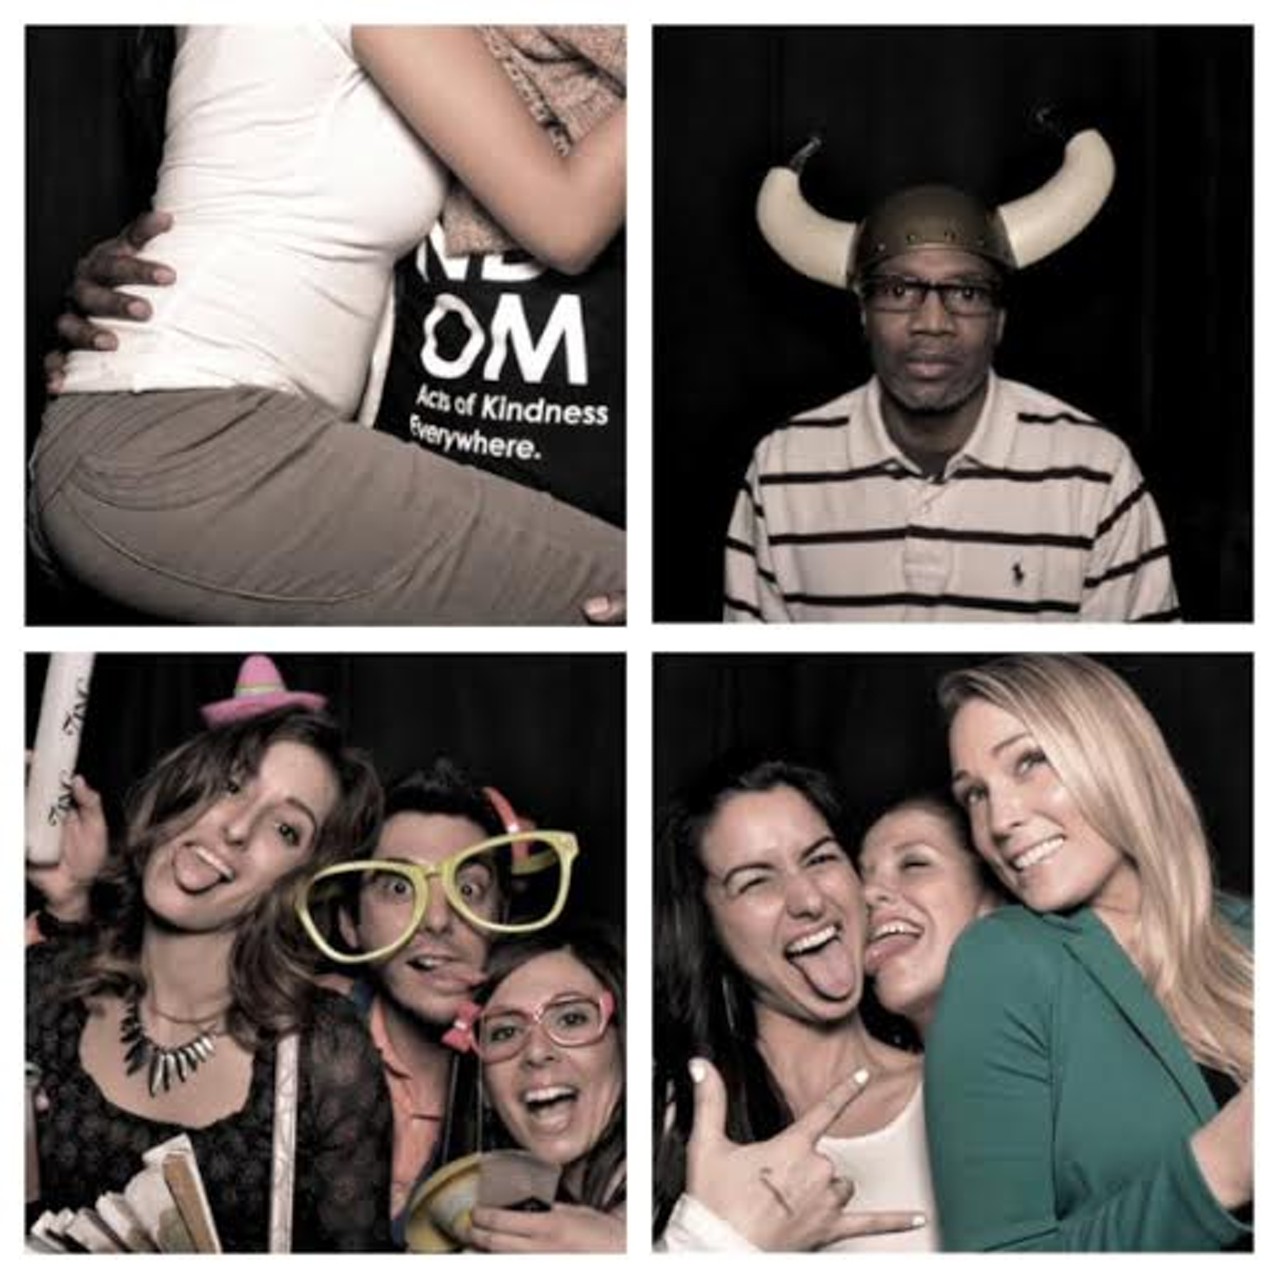 25 Crazy Pics from the Photo Booth at Vodka